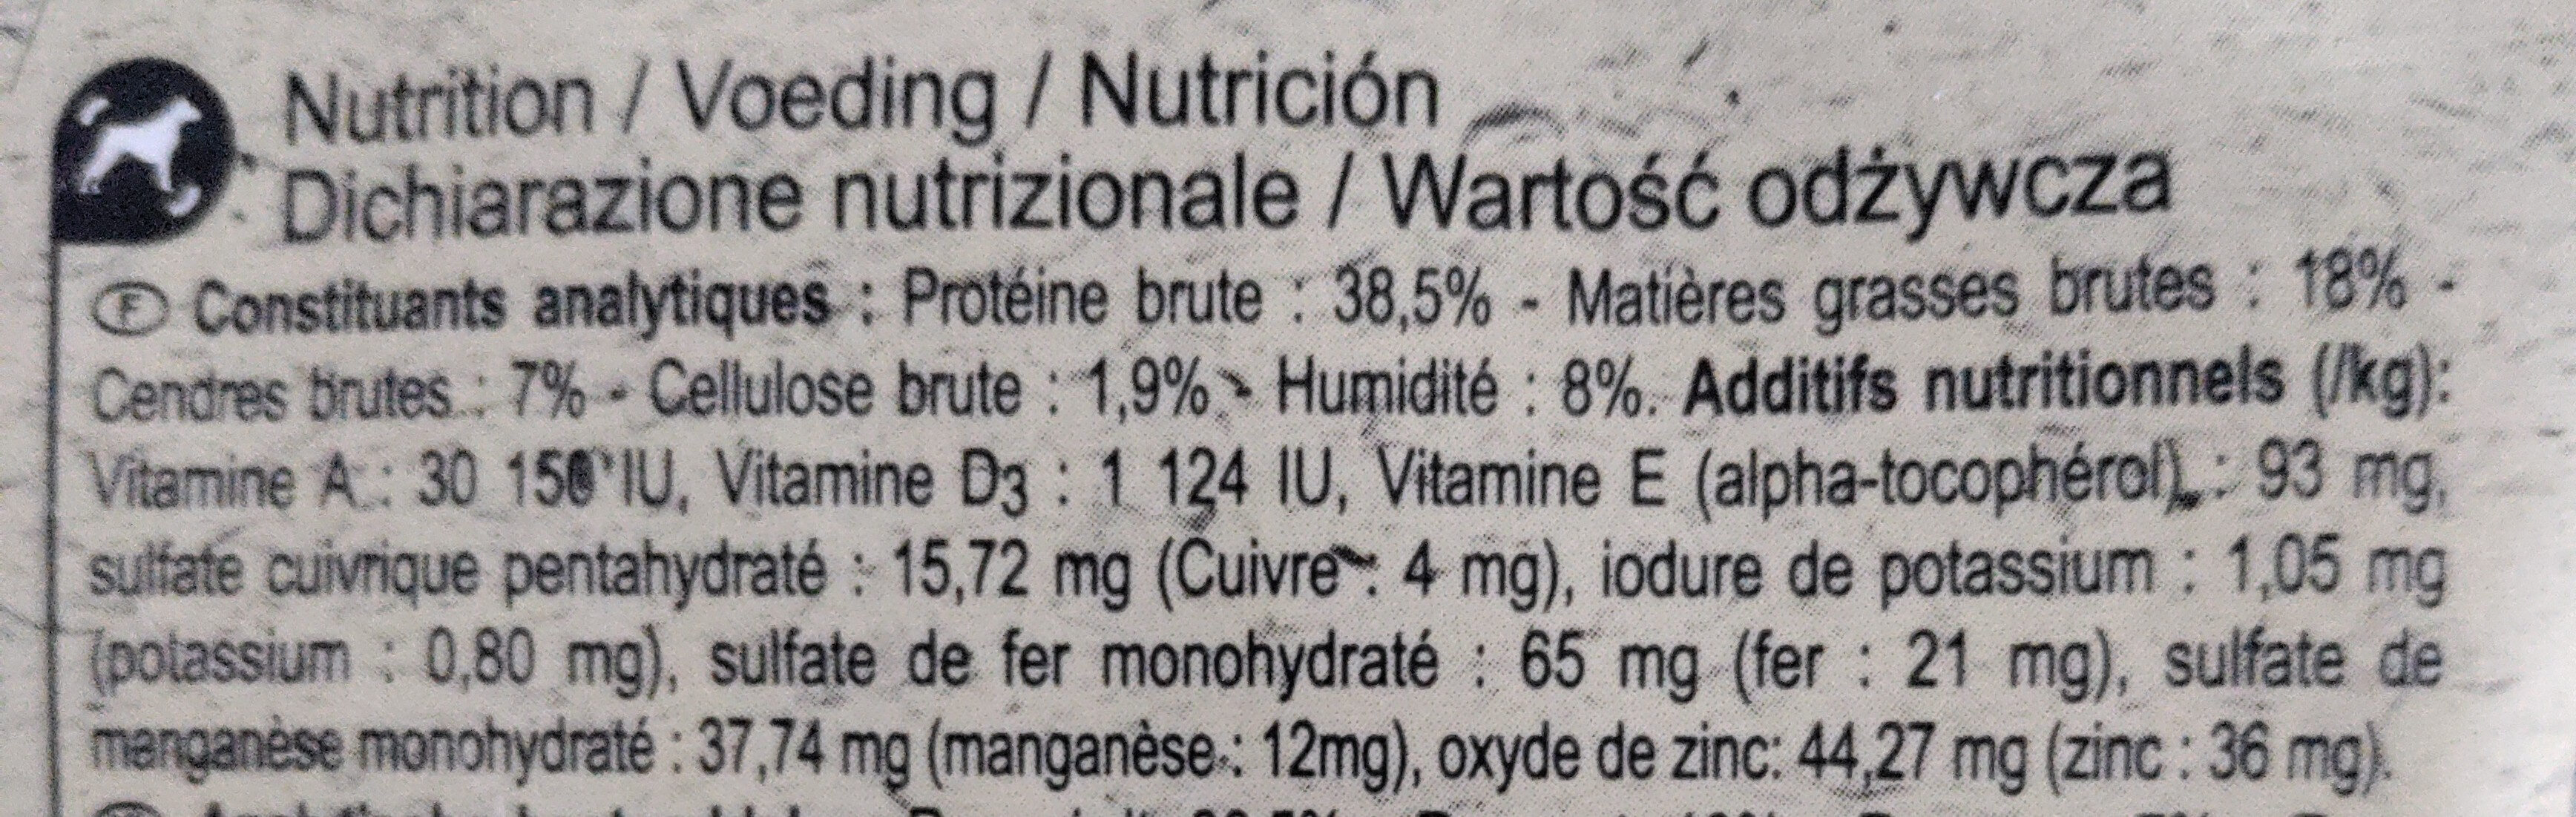 Croquettes - Nutrition facts - fr